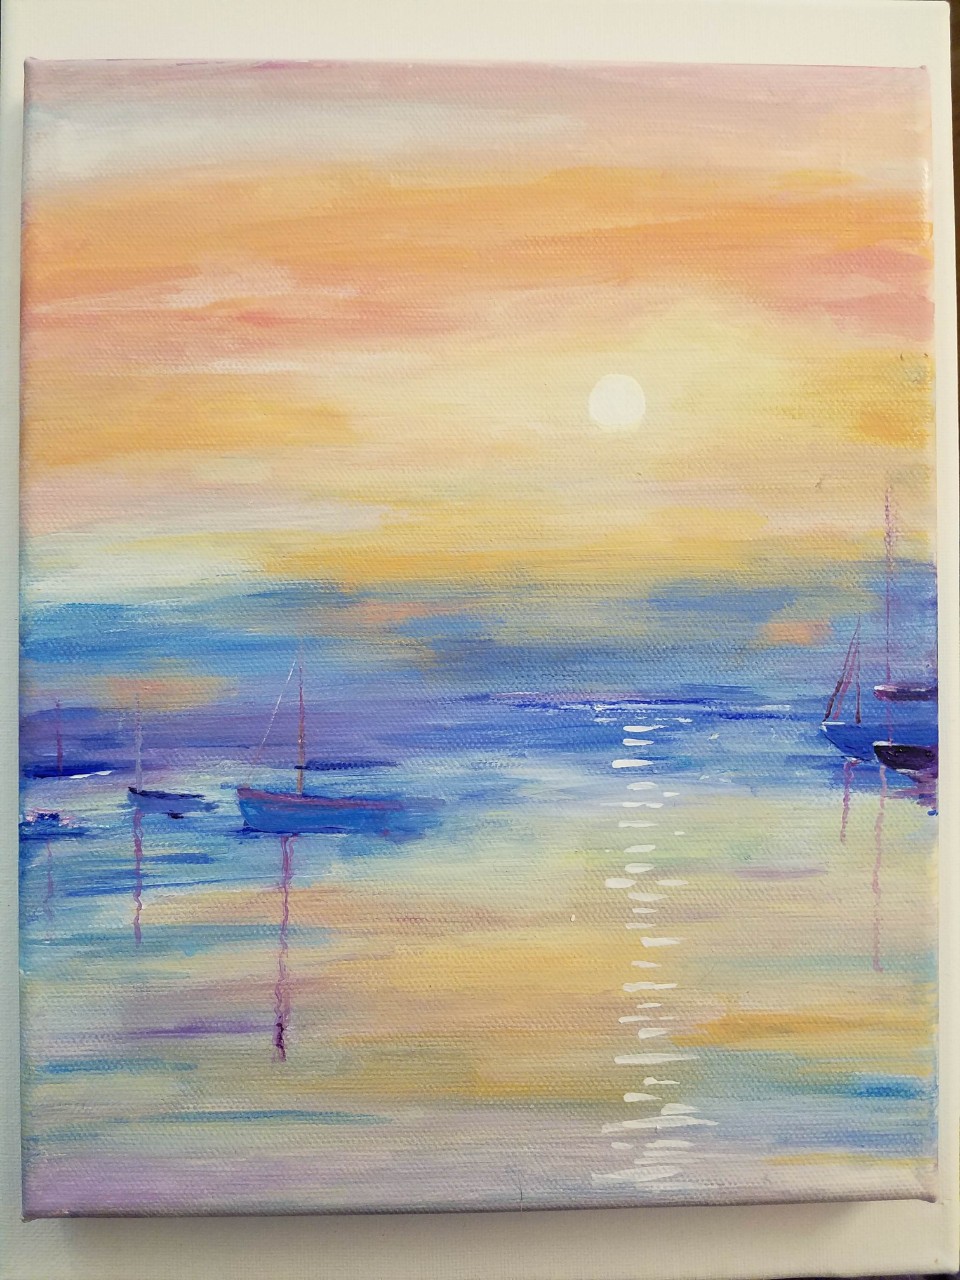 an abstract watercolor of sailboats on the water, against a yellow and orange sky.